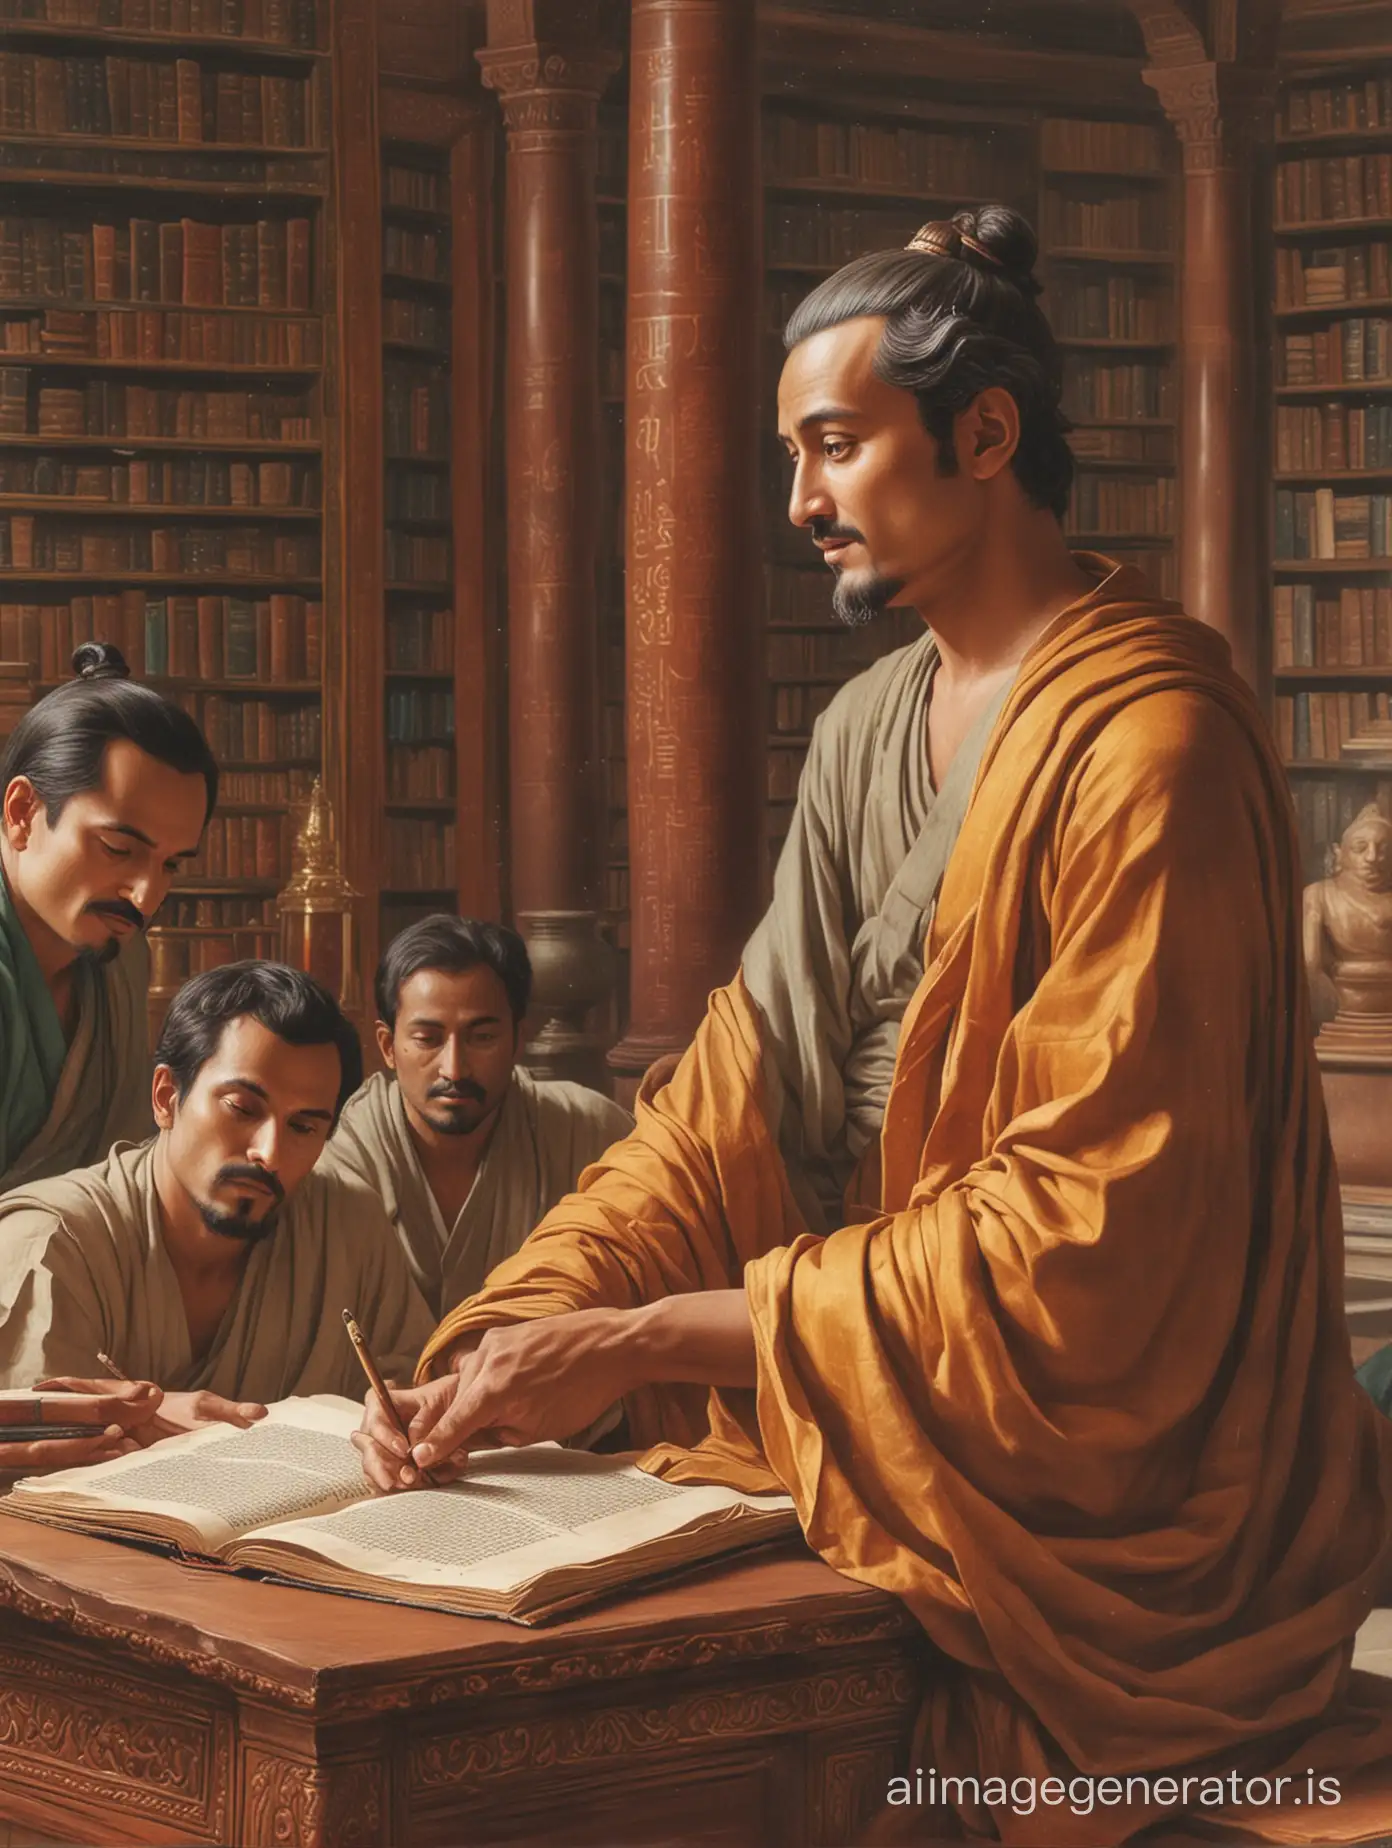 Close-up of Siddhartha engaging in deep conversations with scholars and philosophers in the palace library, the scent of ancient manuscripts and incense lingering in the air